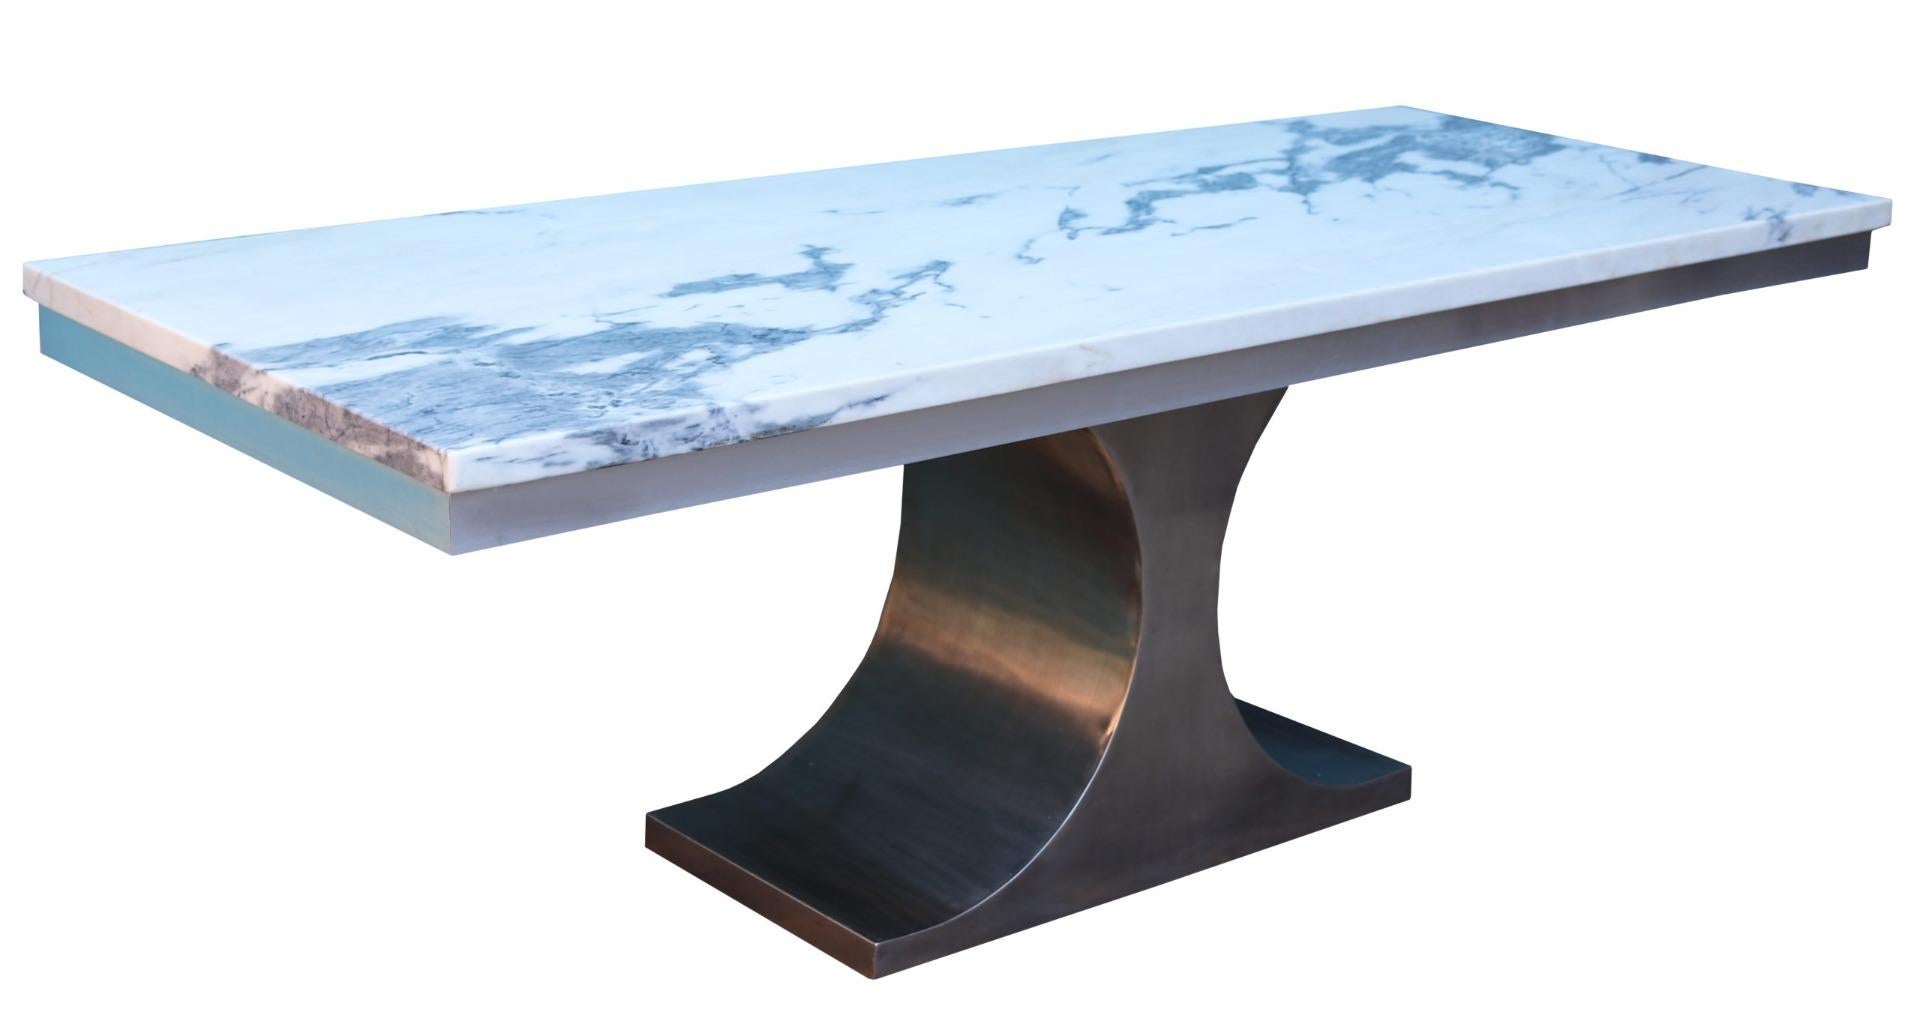 A 1970s dining table. The shaped steel frame clad in stainless steel, with an aluminium perimeter, supporting a single slab of thick Carrara marble.

Additional dimensions:

Height to the table underside 69.5 cm.